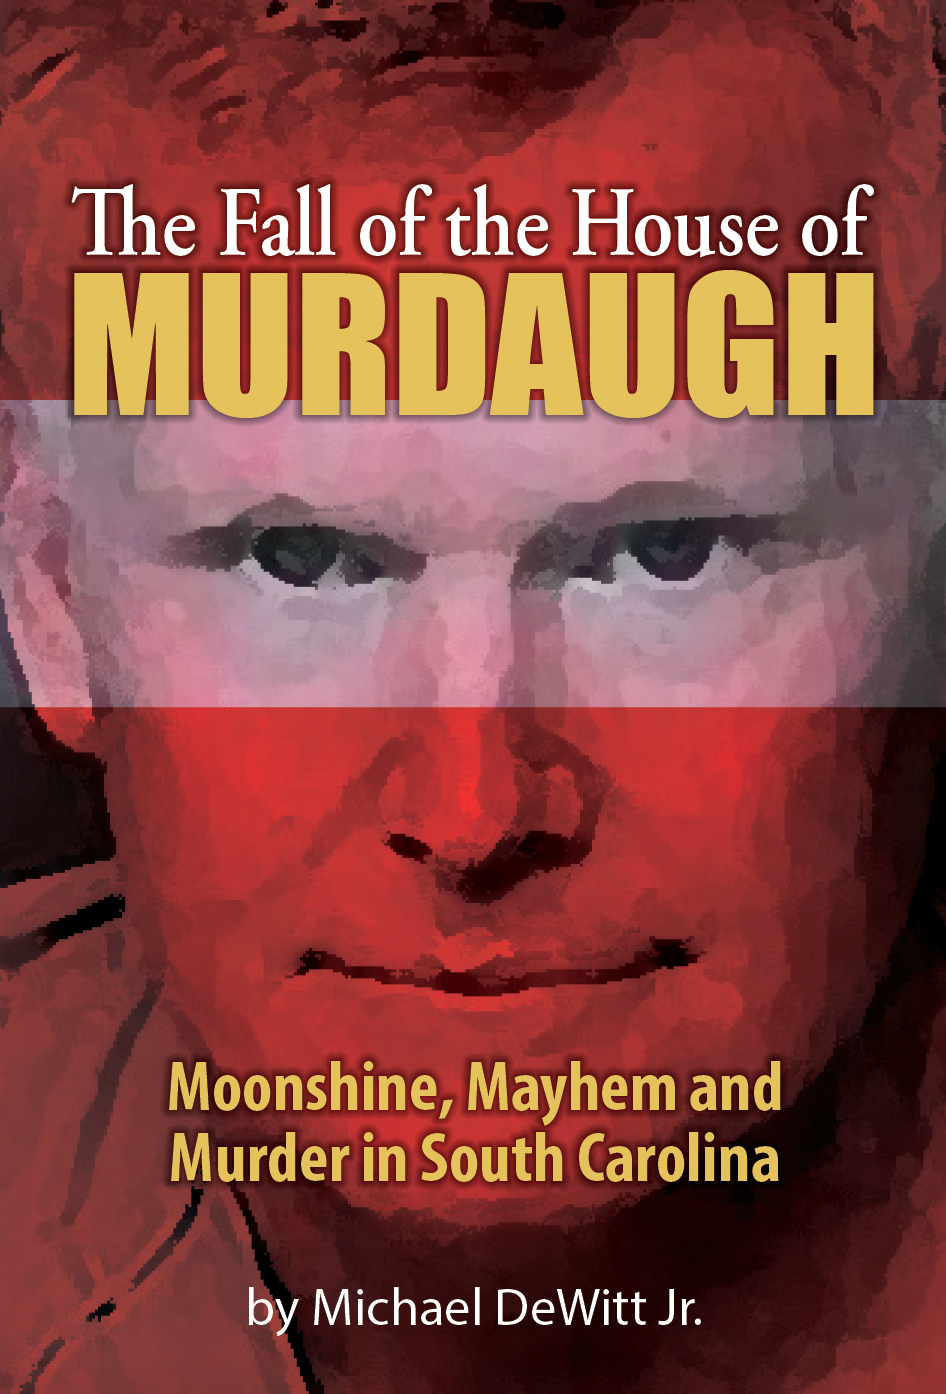 The front cover of The Fall of the House of Murdaugh, by Gannett journalist and author Michael DeWitt Jr.